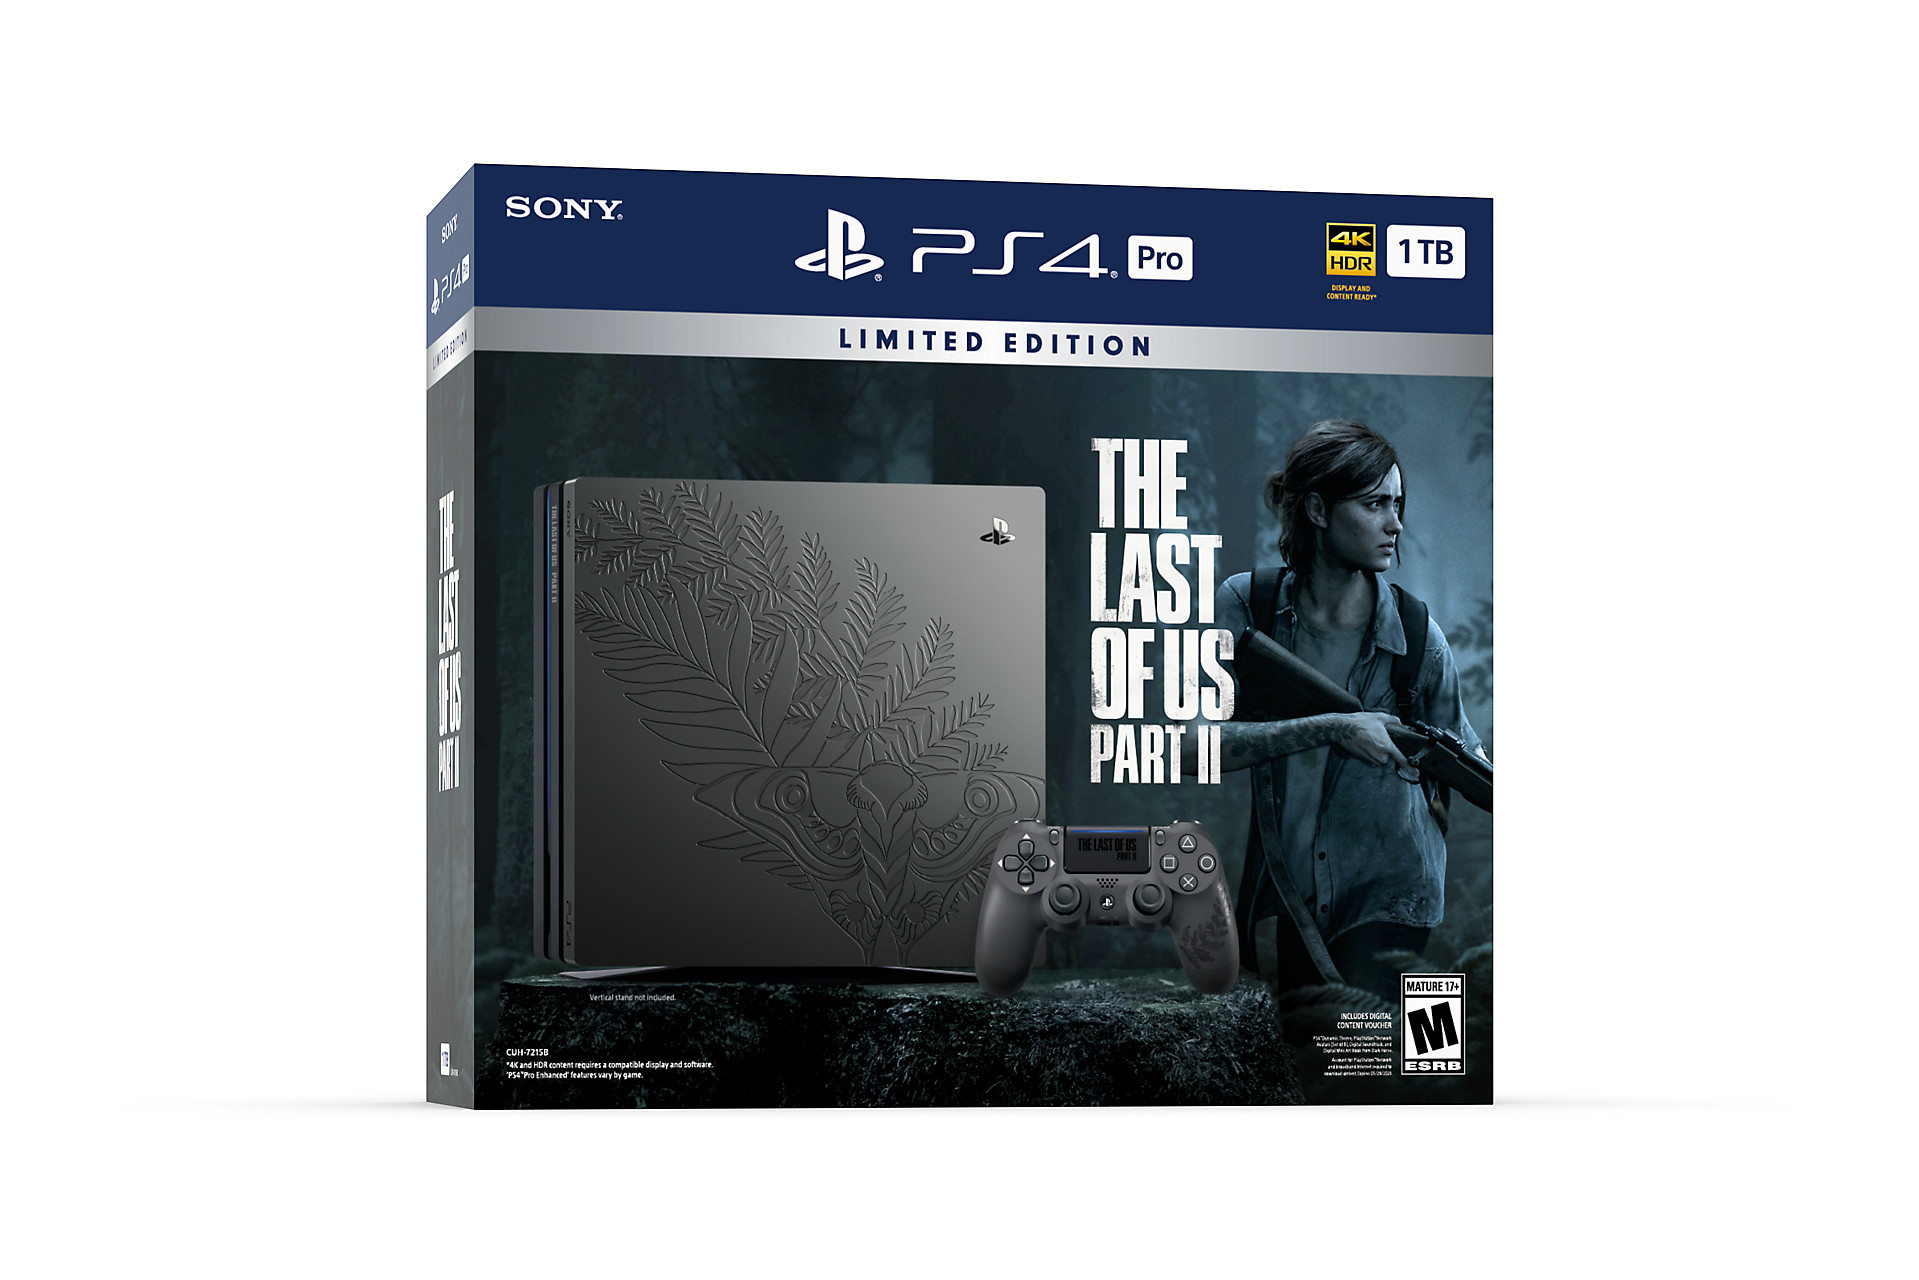 the-last-of-us-part-ii-limited-edition-bundle-beauty-shot-3-ps4-pro-en-us-18may20